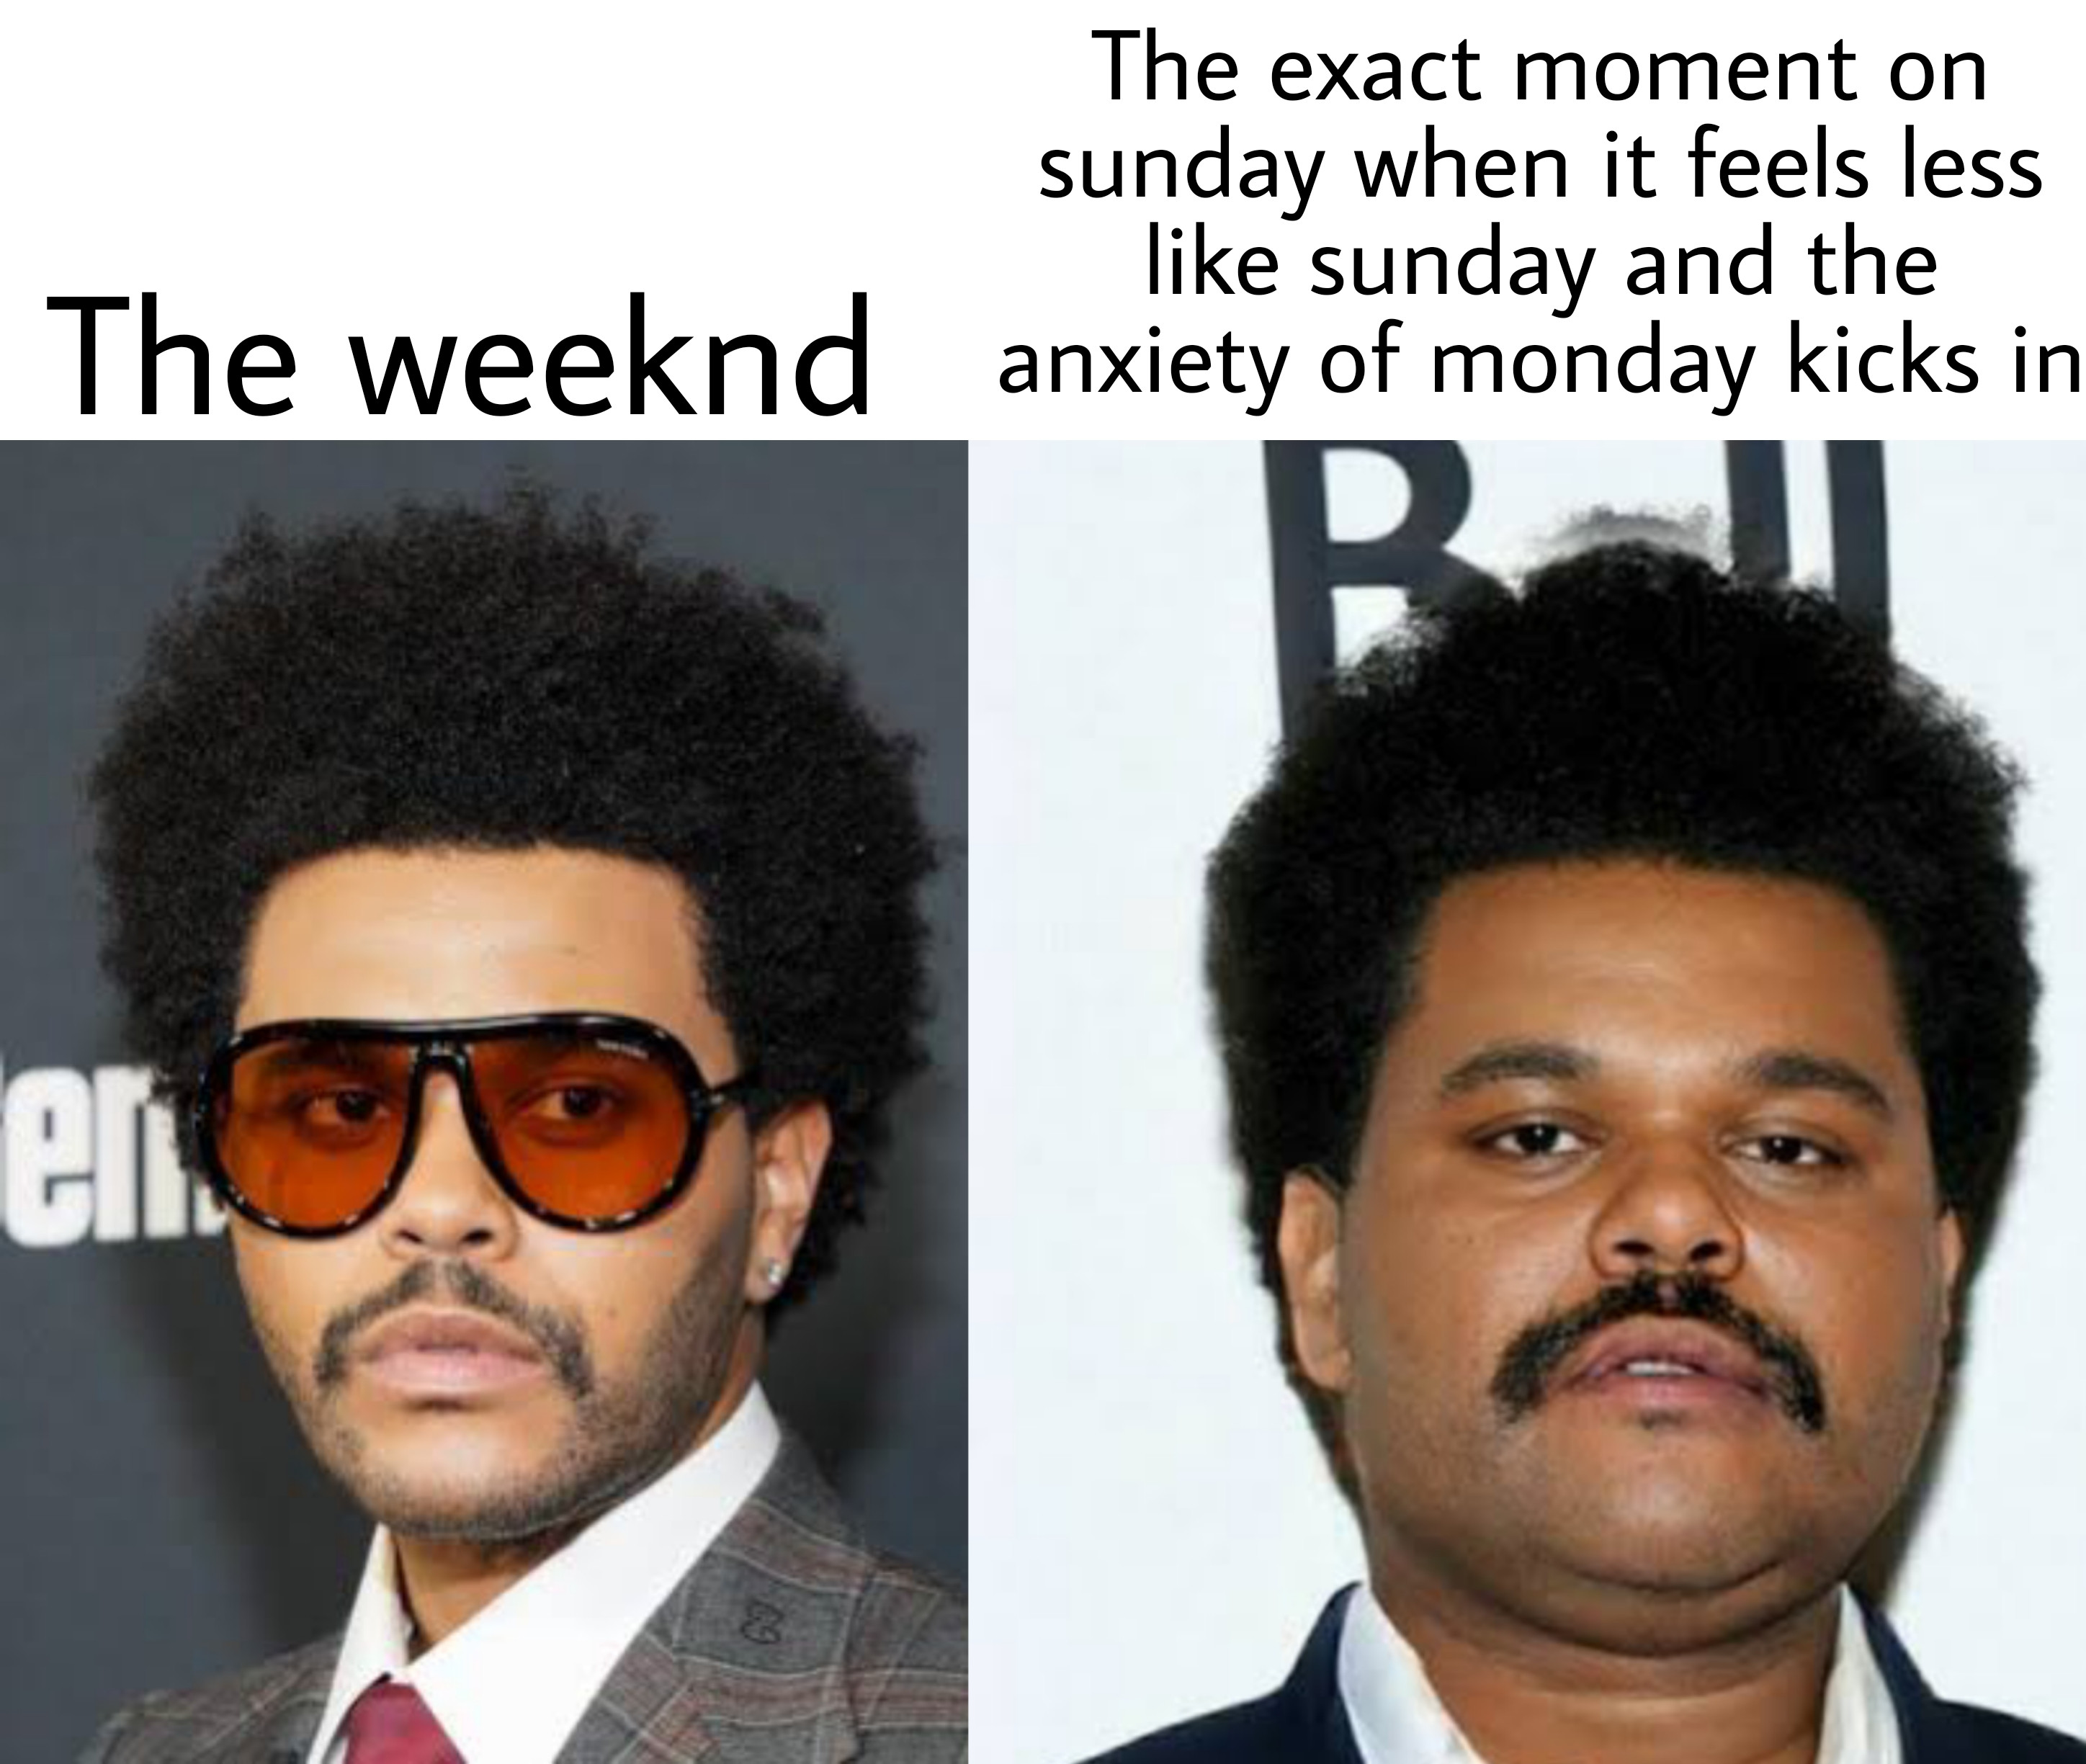 weekend the month - The exact moment on sunday when it feels less sunday and the The weeknd anxiety of monday kicks in en.